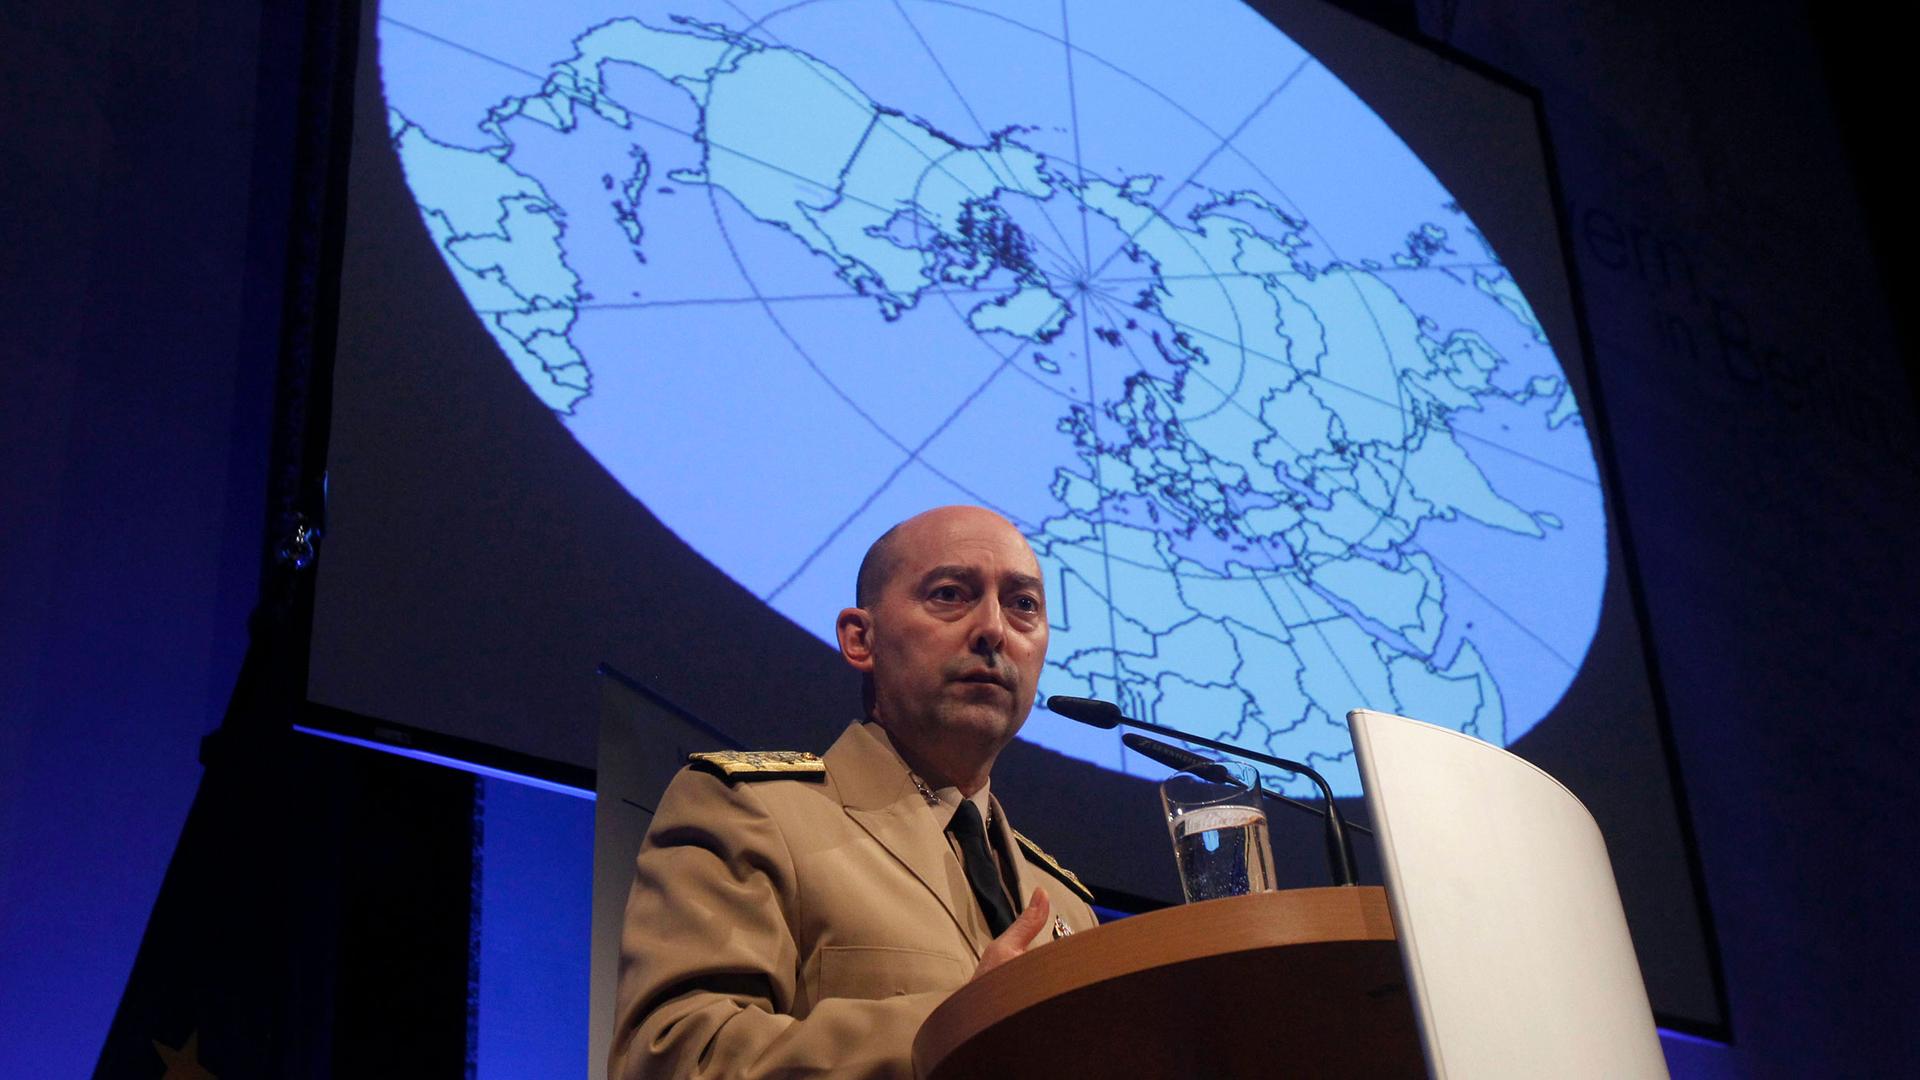 A man stands at a podium with an image of a globe behind him